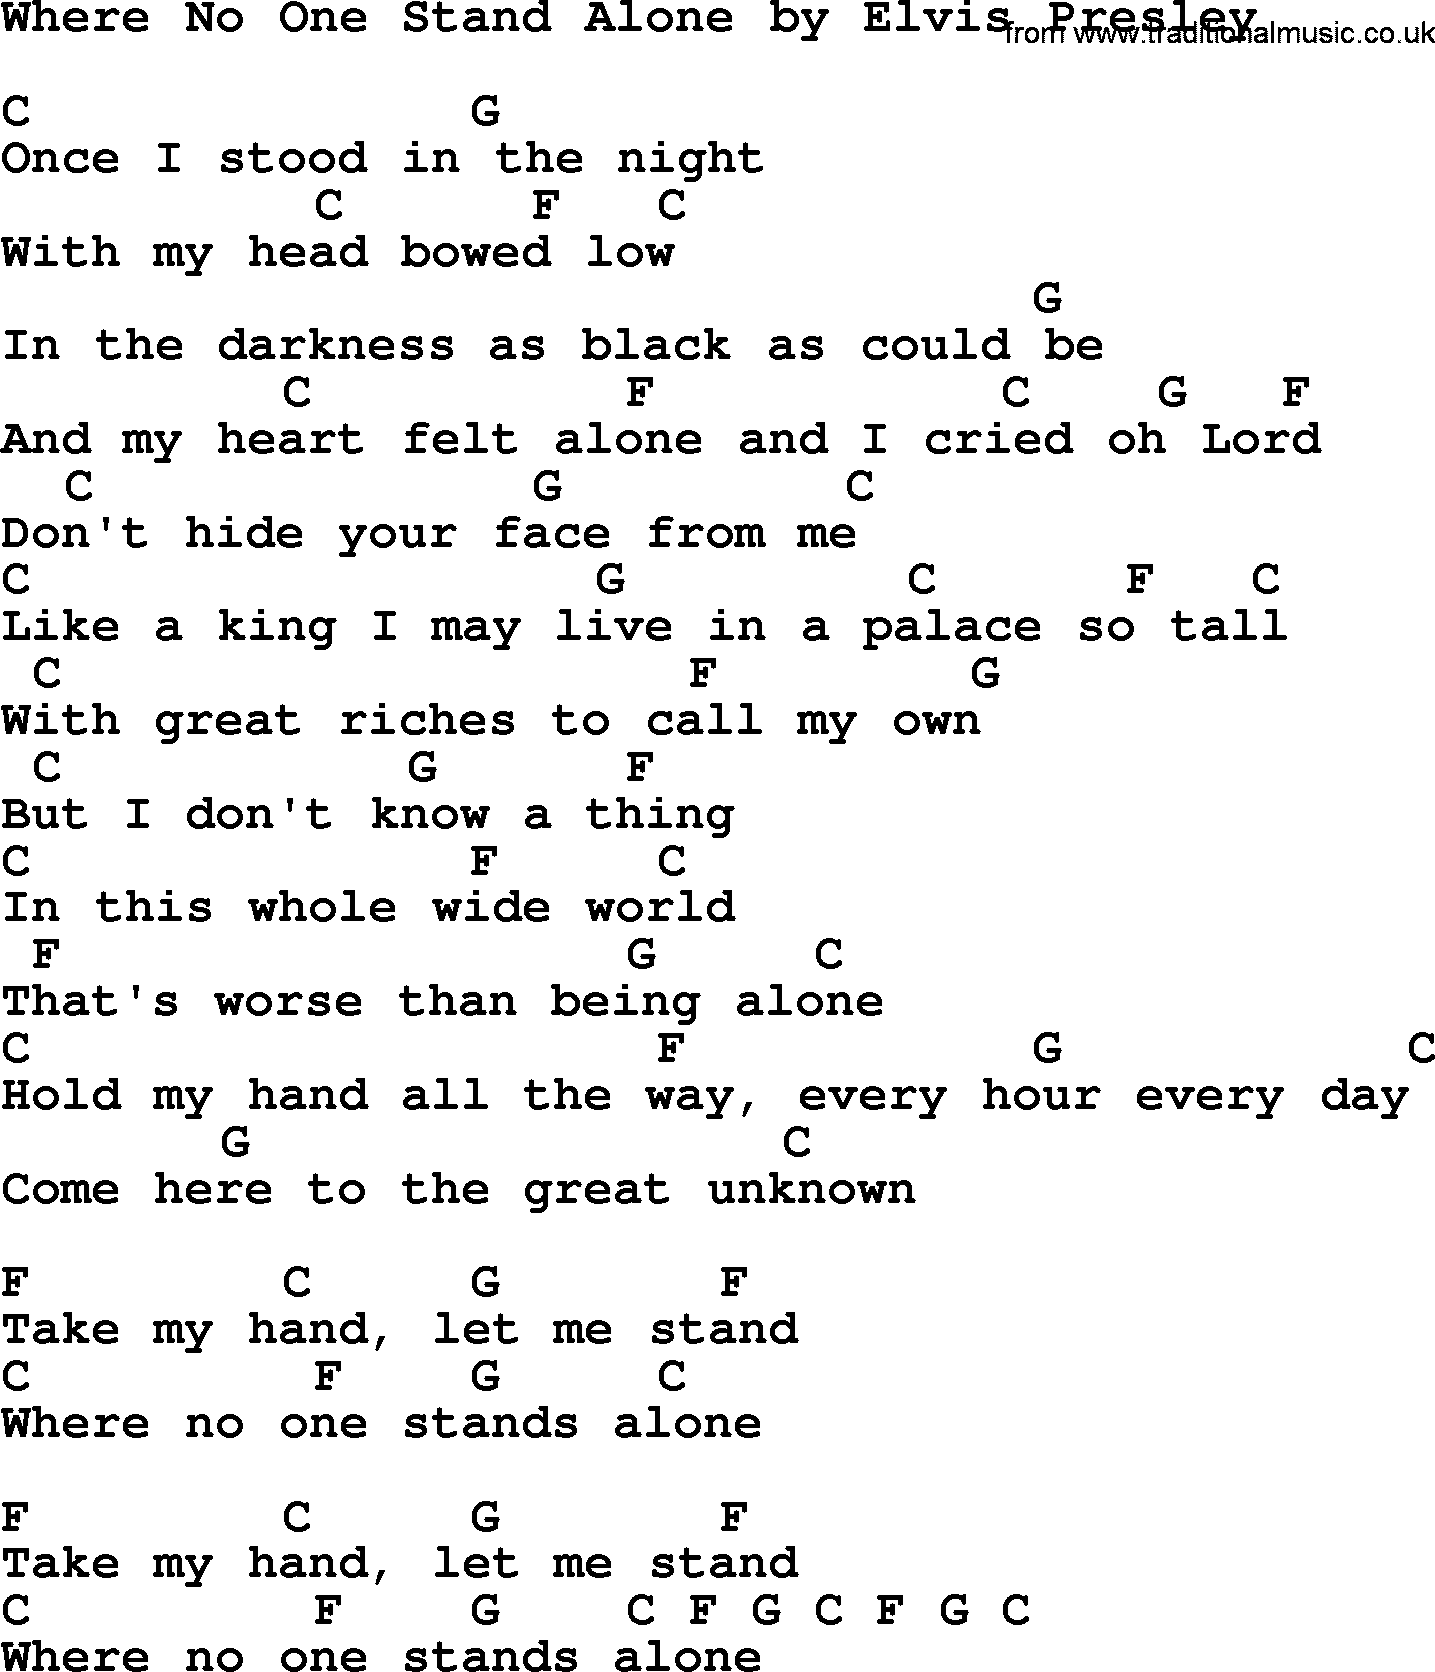 Elvis Presley song: Where No One Stand Alone, lyrics and chords